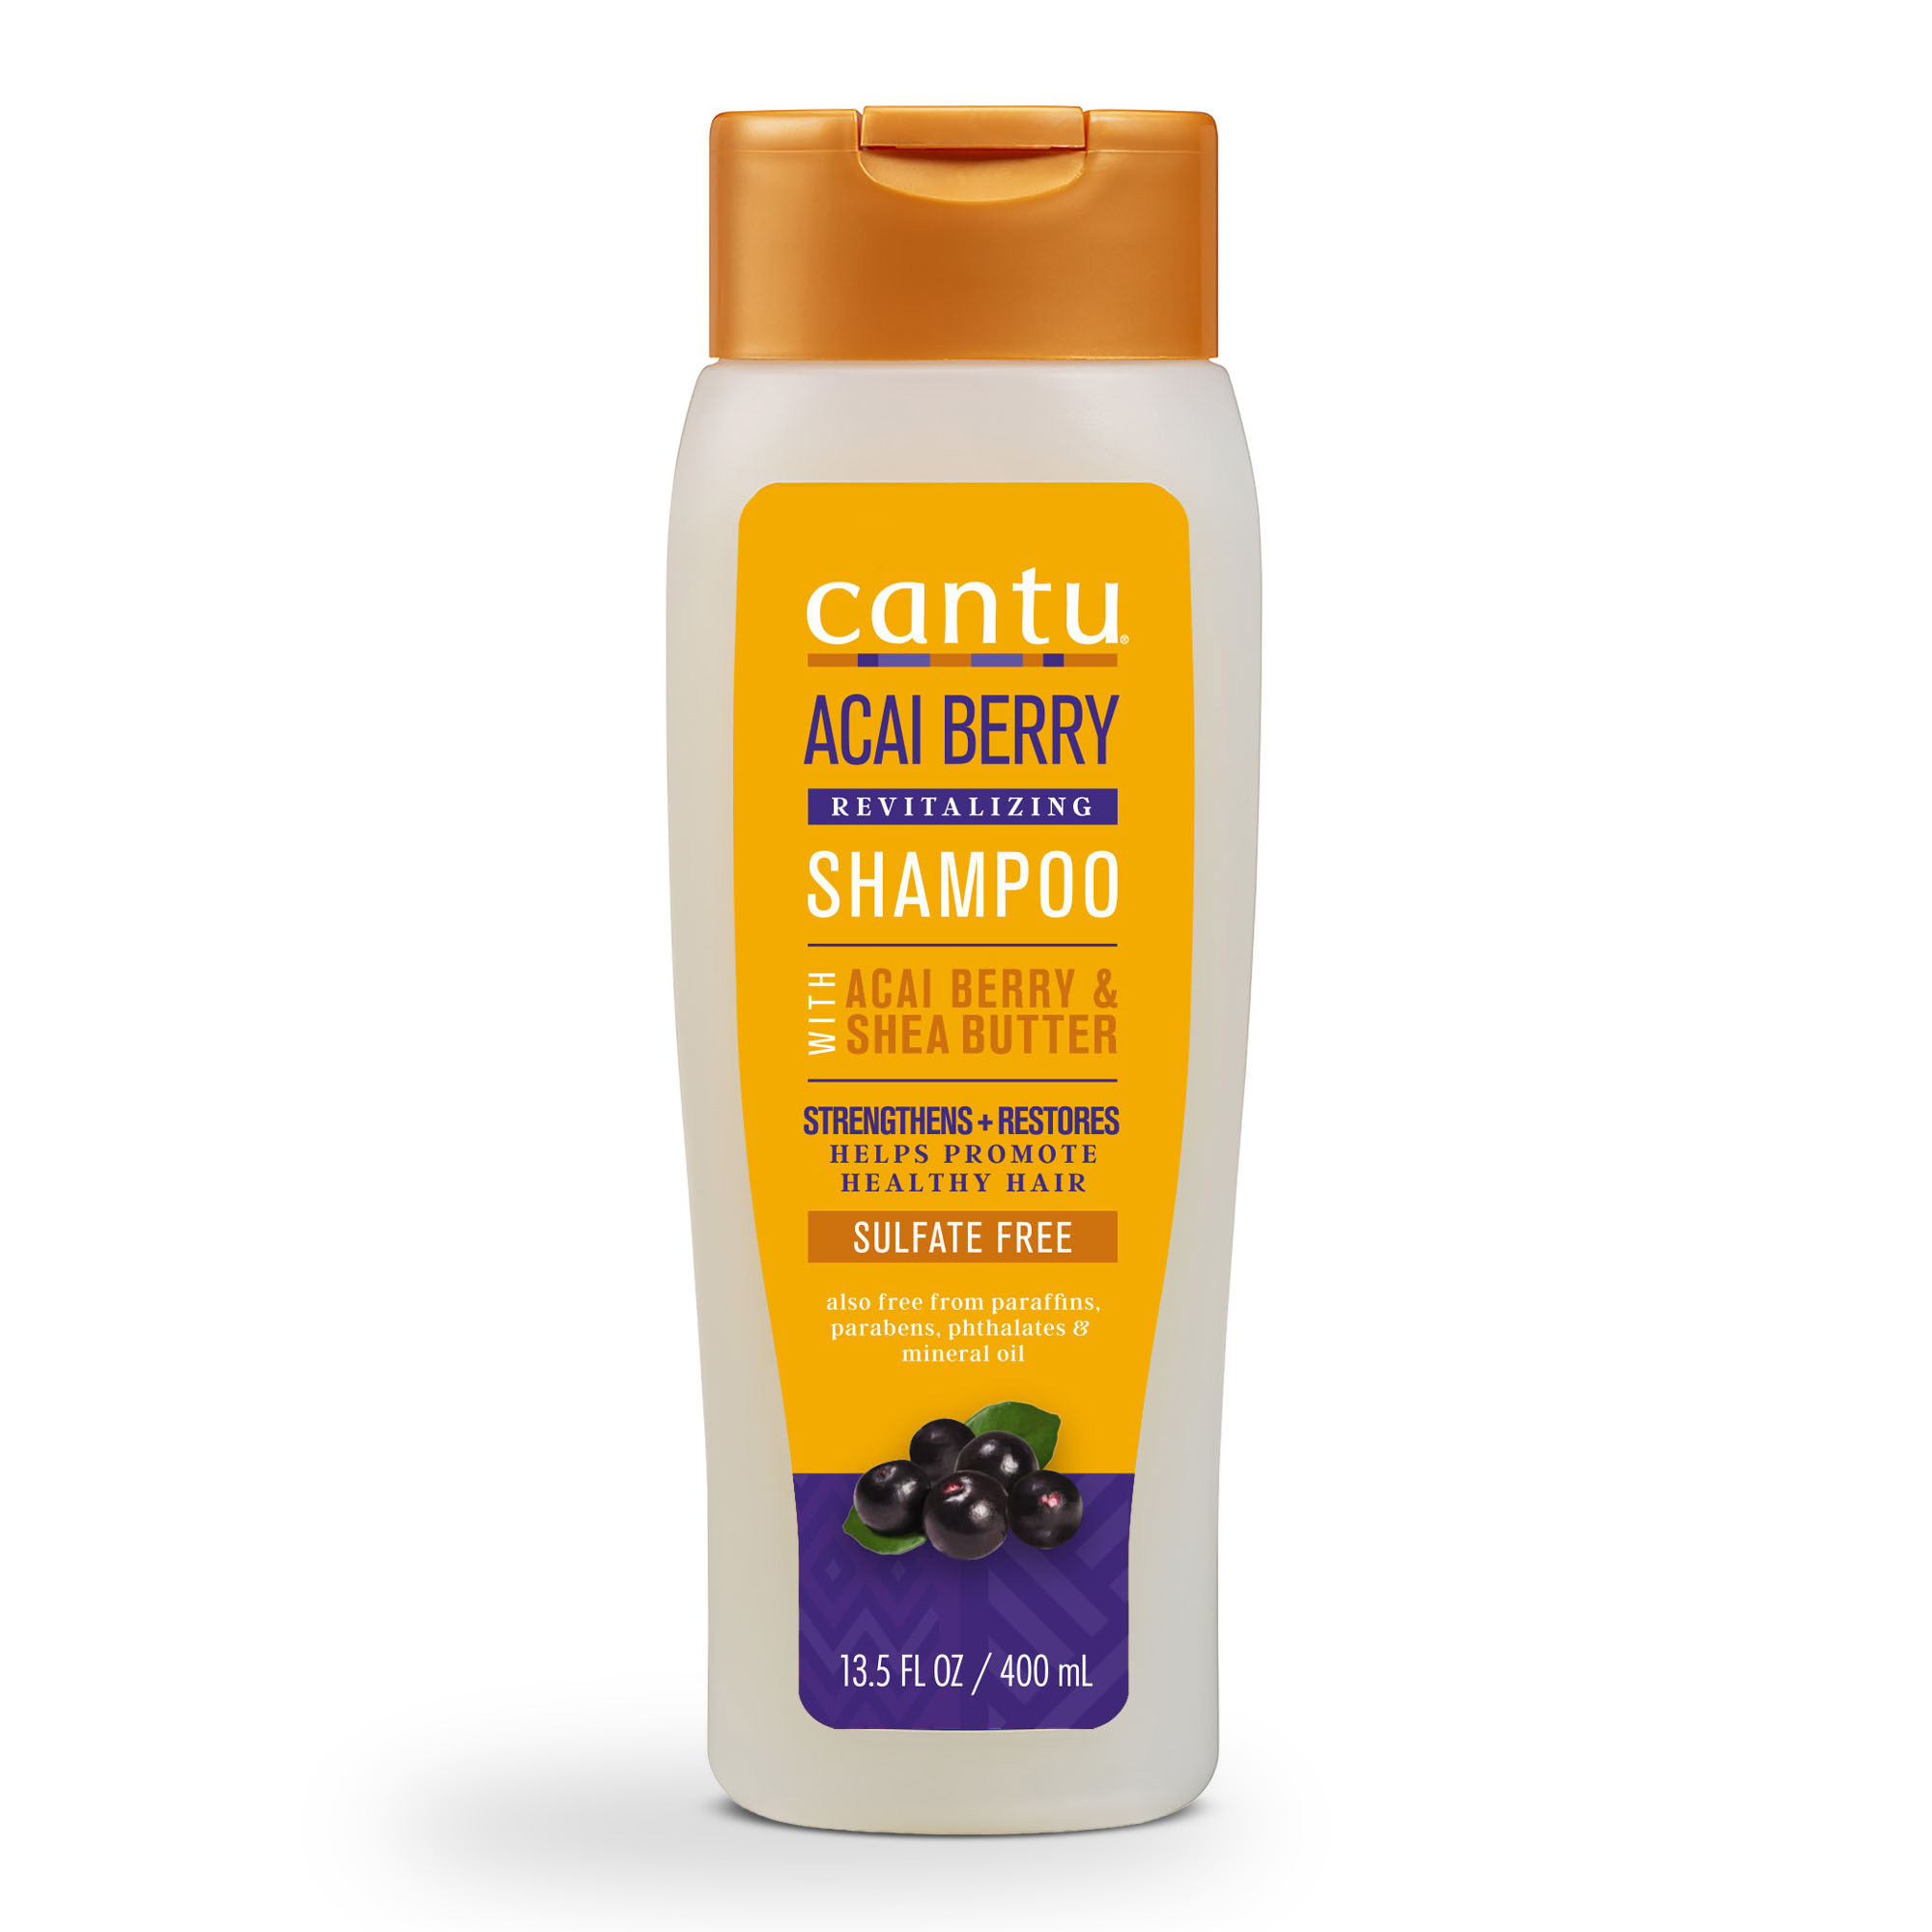 Cantu Revitalizing Shampoo with Acai Berry and Shea Butter, 13.5 fl oz. - image 1 of 9